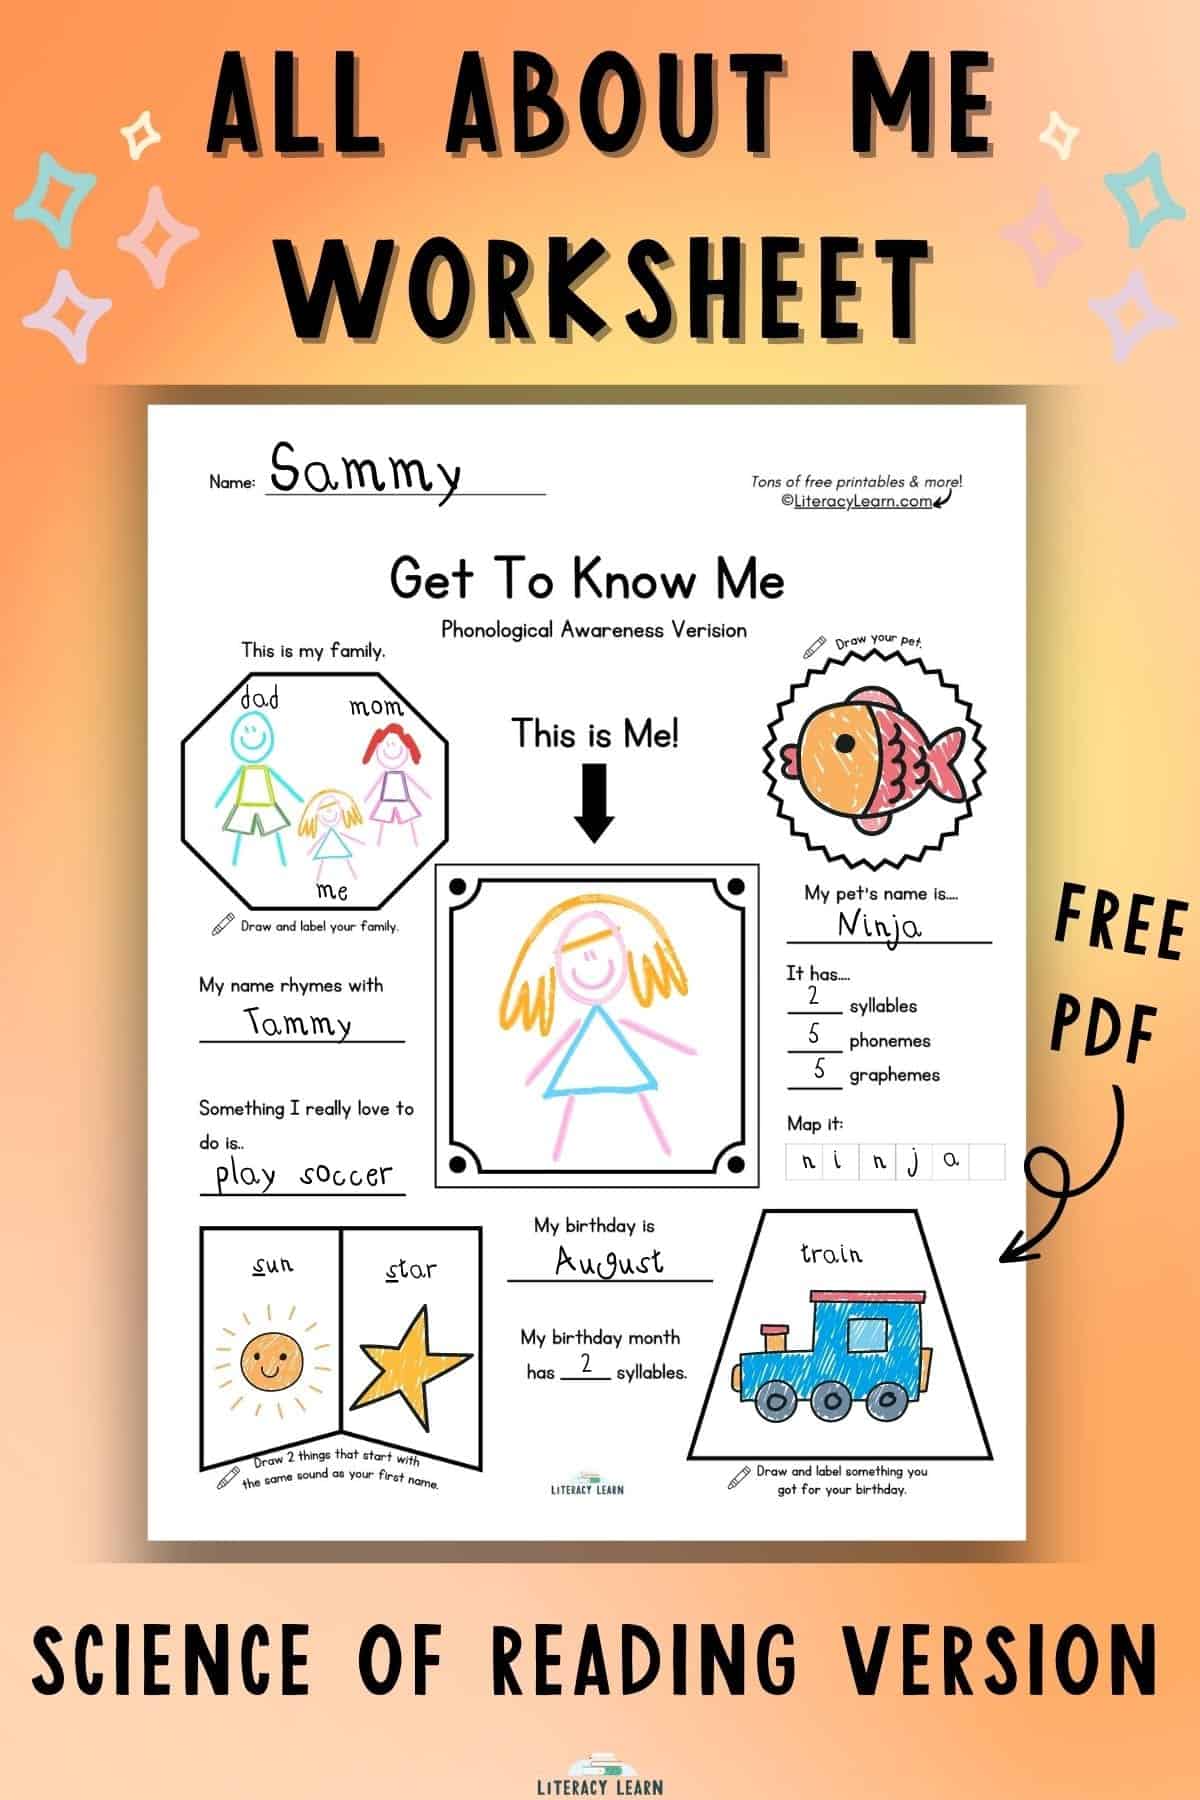 Orange graphic with title "All About Me Worksheet - Science of Reading Version" with completed, colorful worksheet.